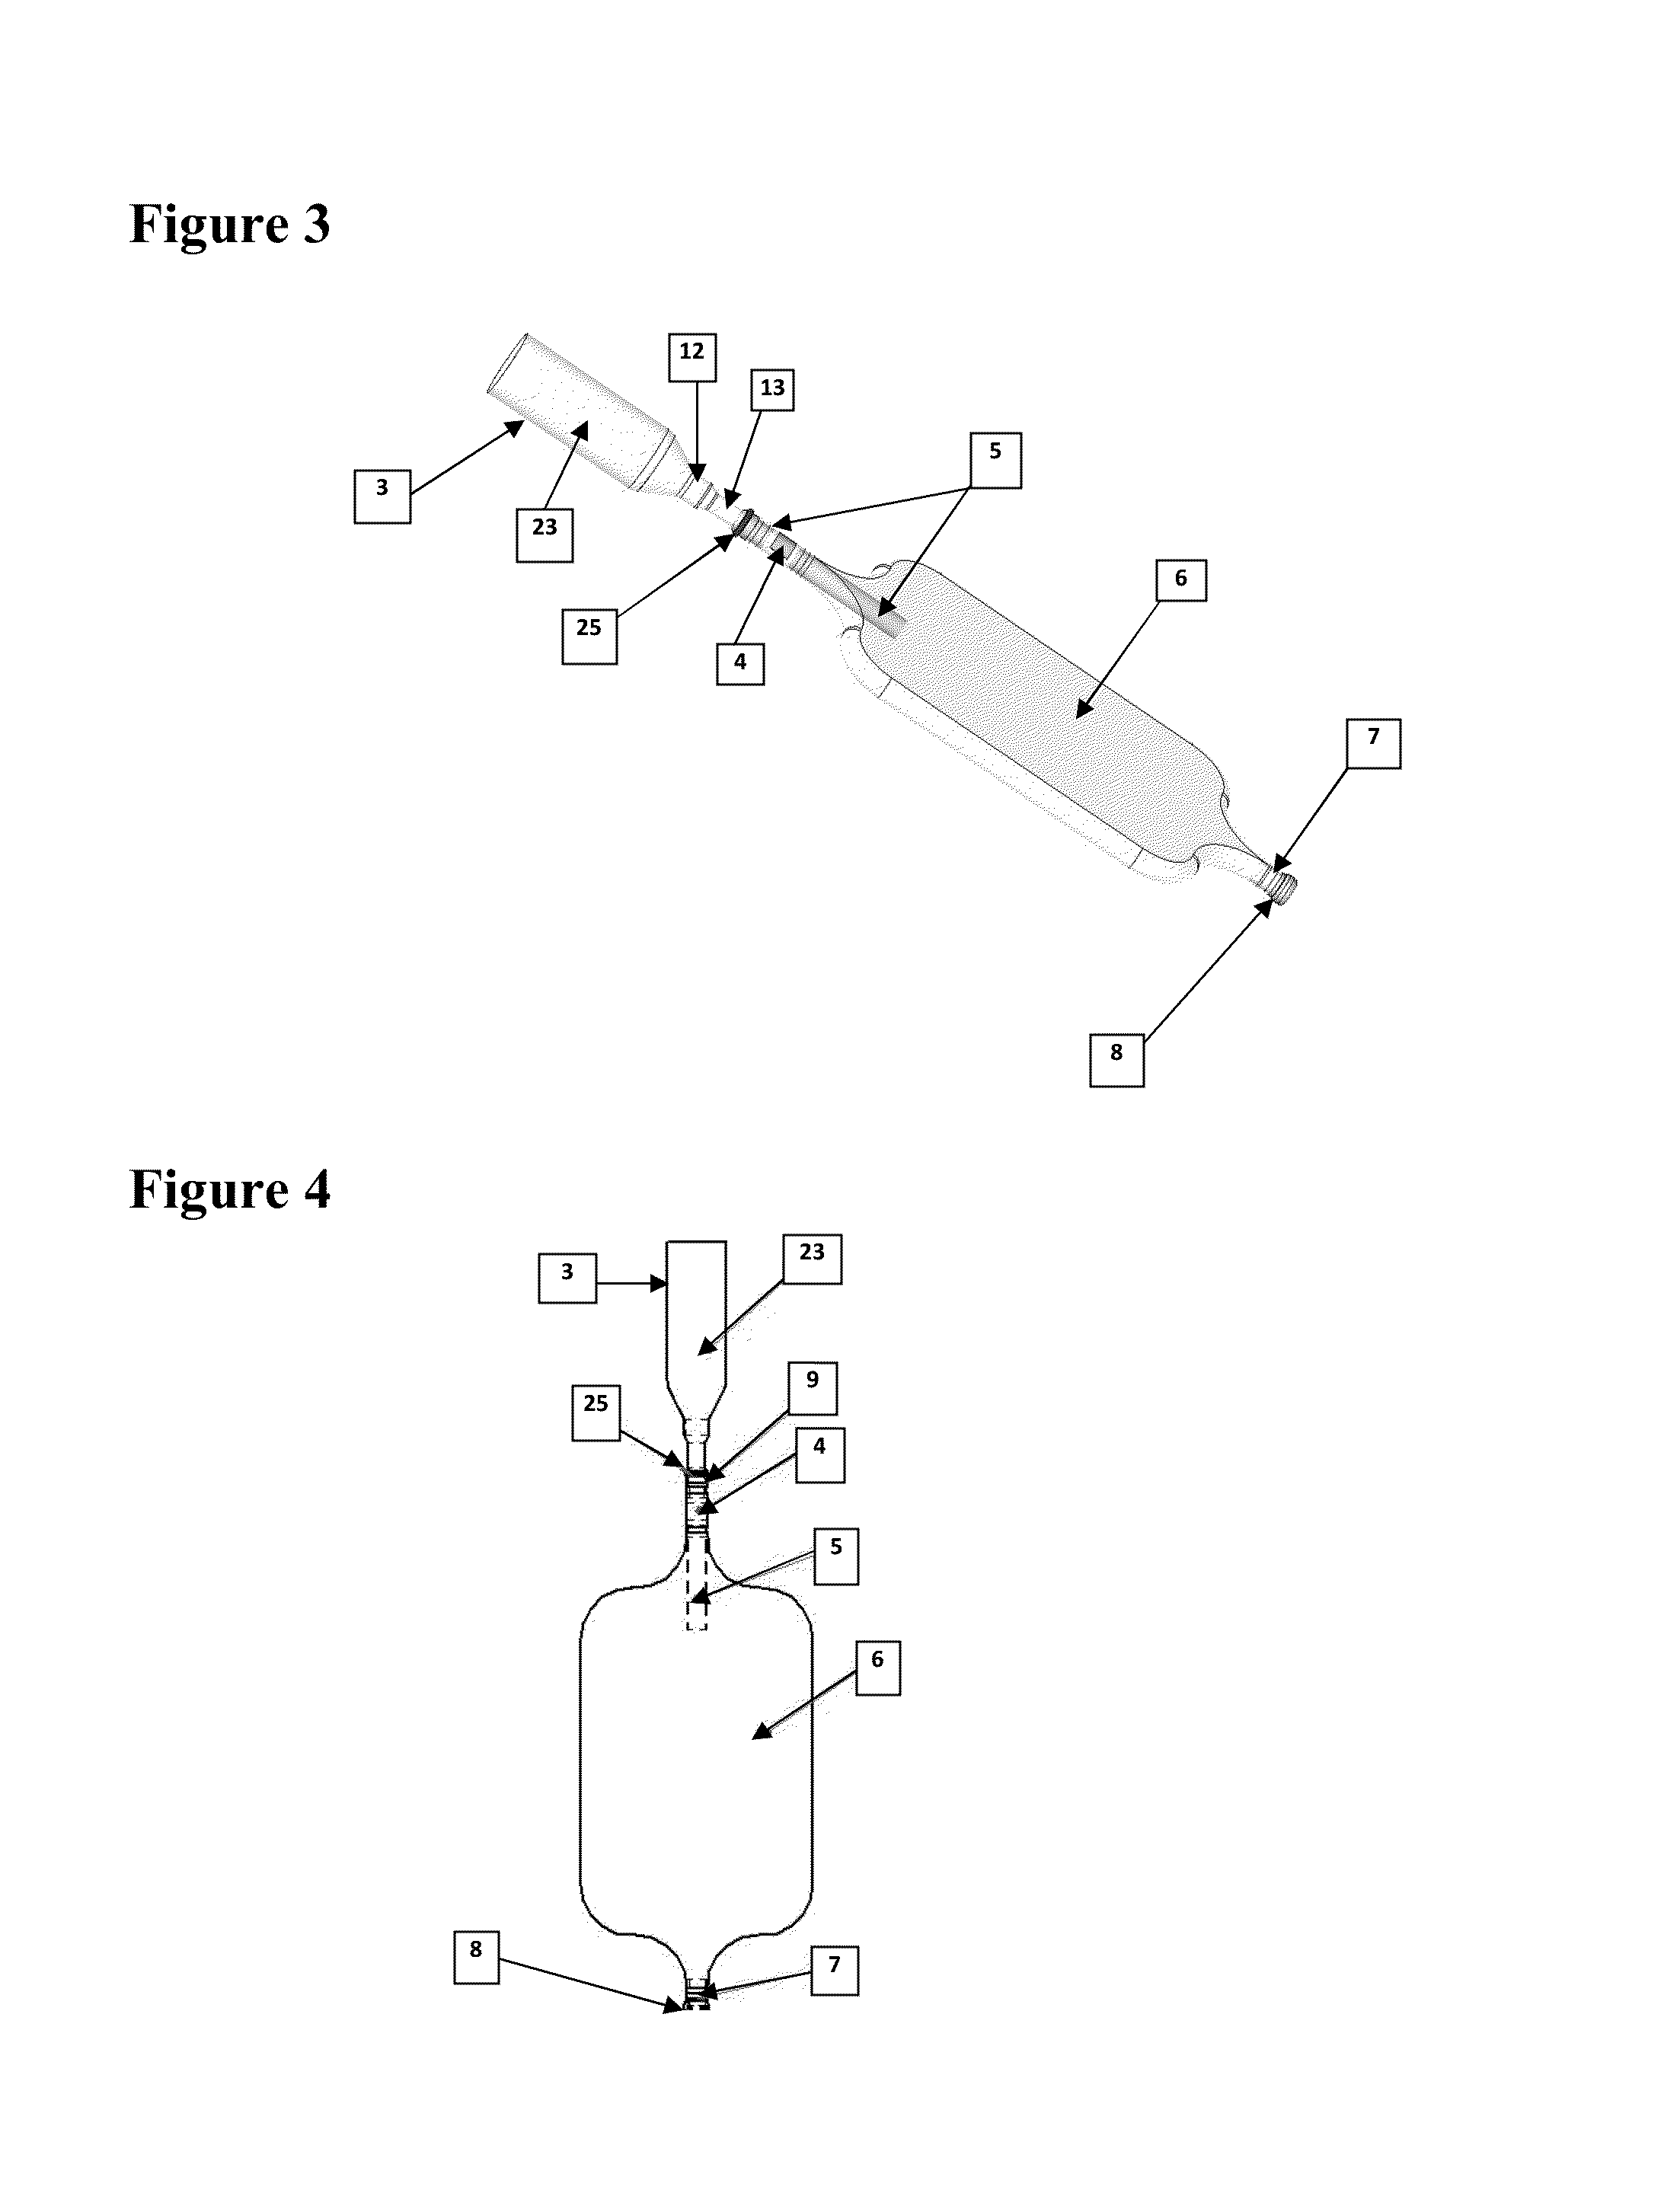 Hydro-block air vent condom catheter and method of use